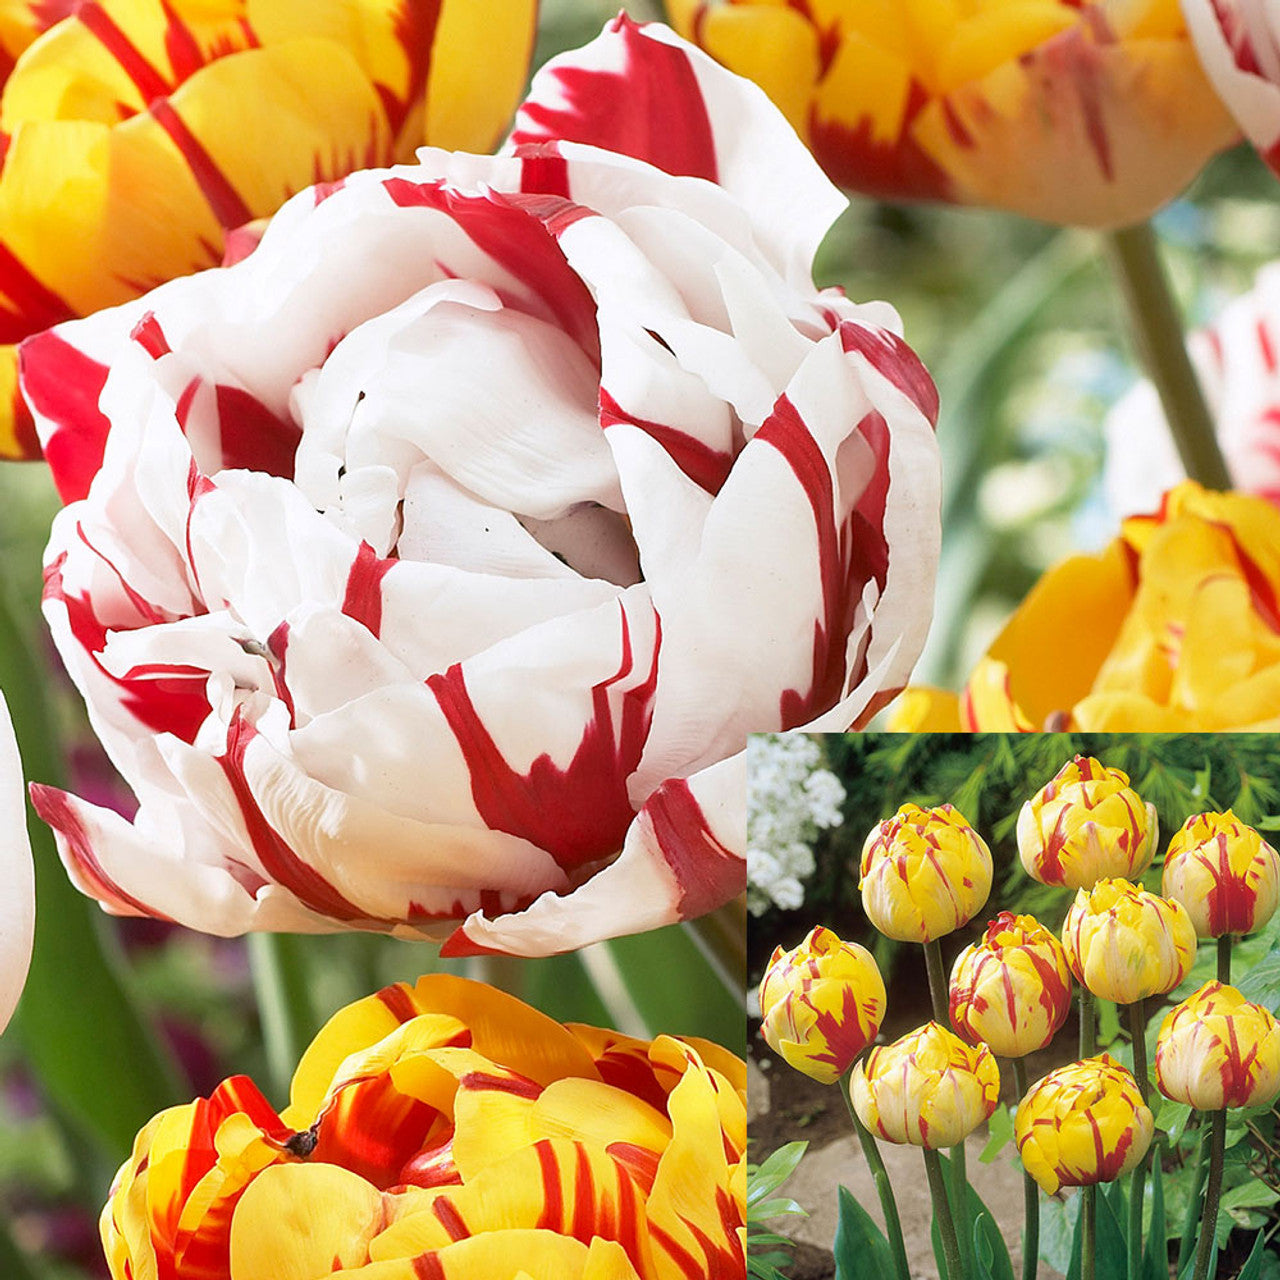 20 Tulip Golden Nizza/Carnival De Nice Collection Bulbs Blooms Species Growing Bonsai Roots Rhizomes Corms Tubers Potted Planting Reblooming Fragrant Garden Flower Seeds Plant